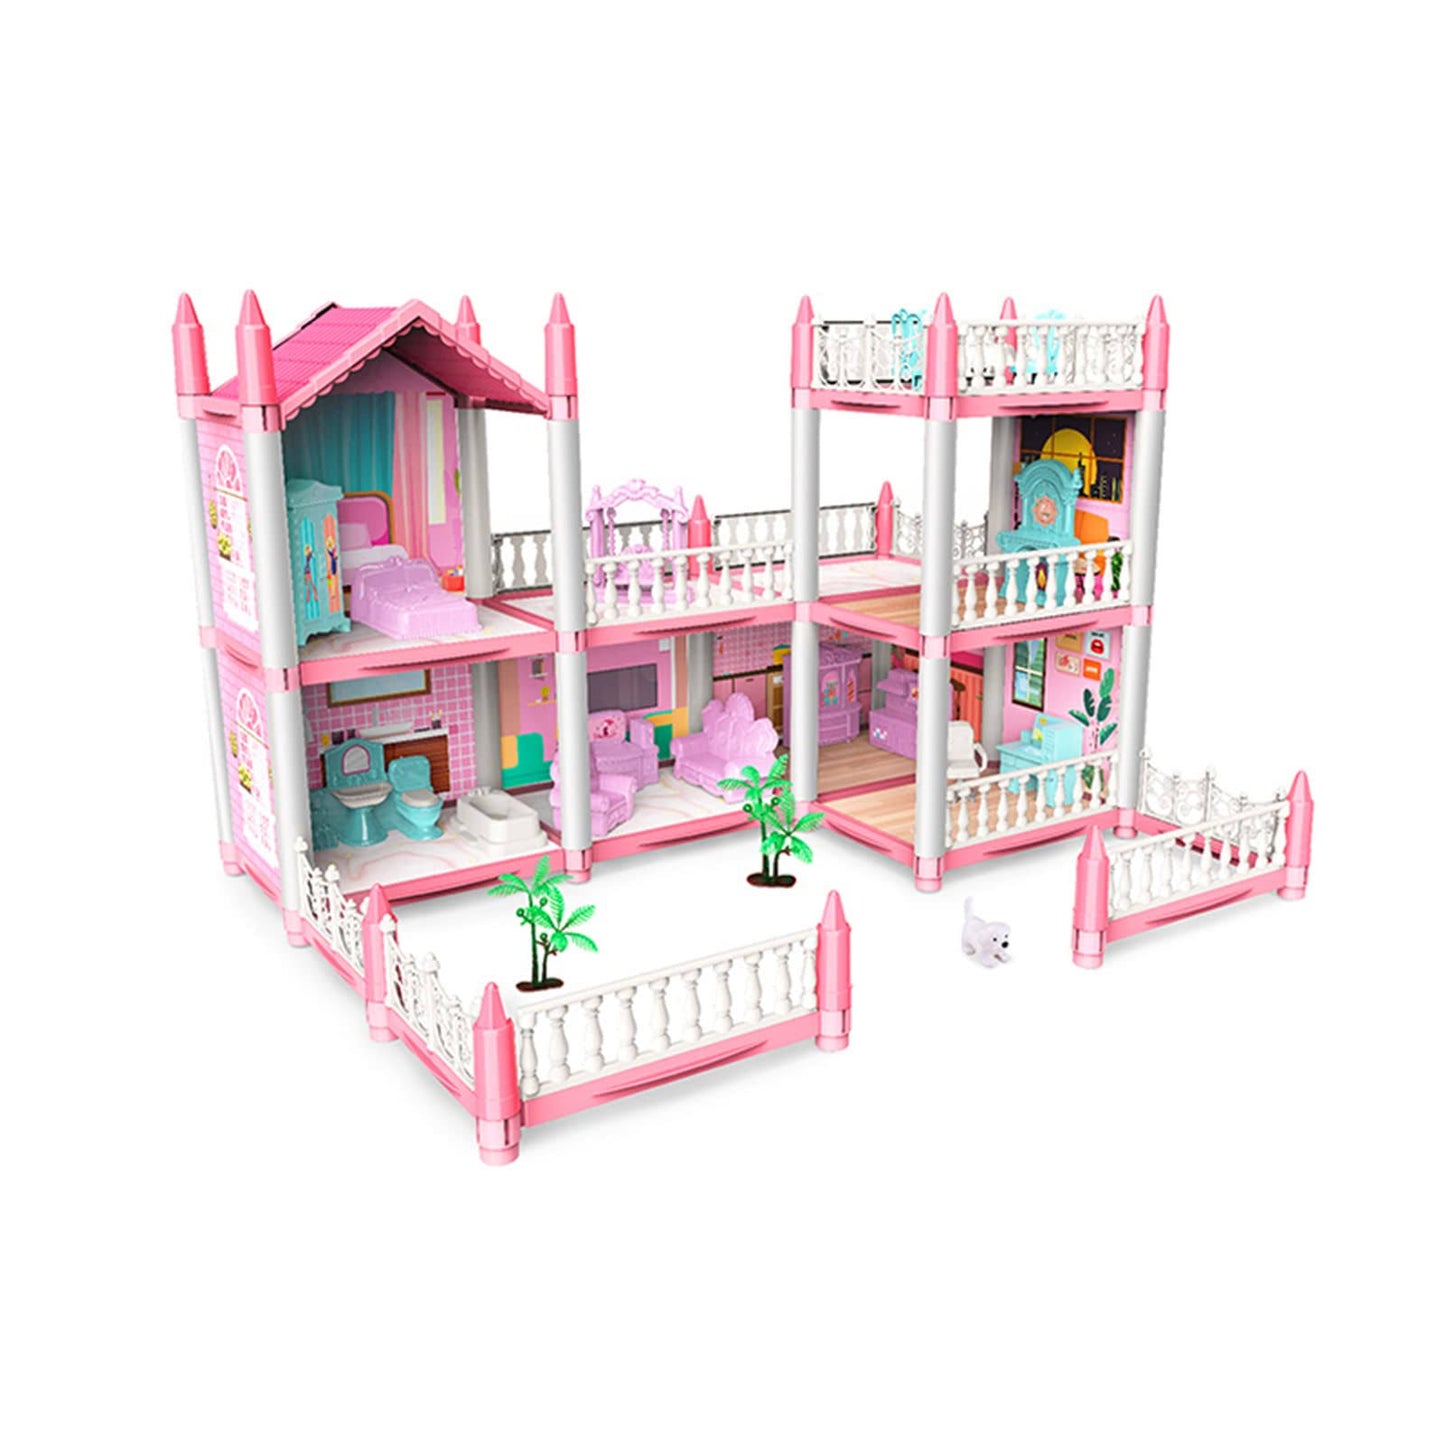 Dreamy Pink Dollhouse Playset, Equipped with 2 Dolls Figures and A Pet